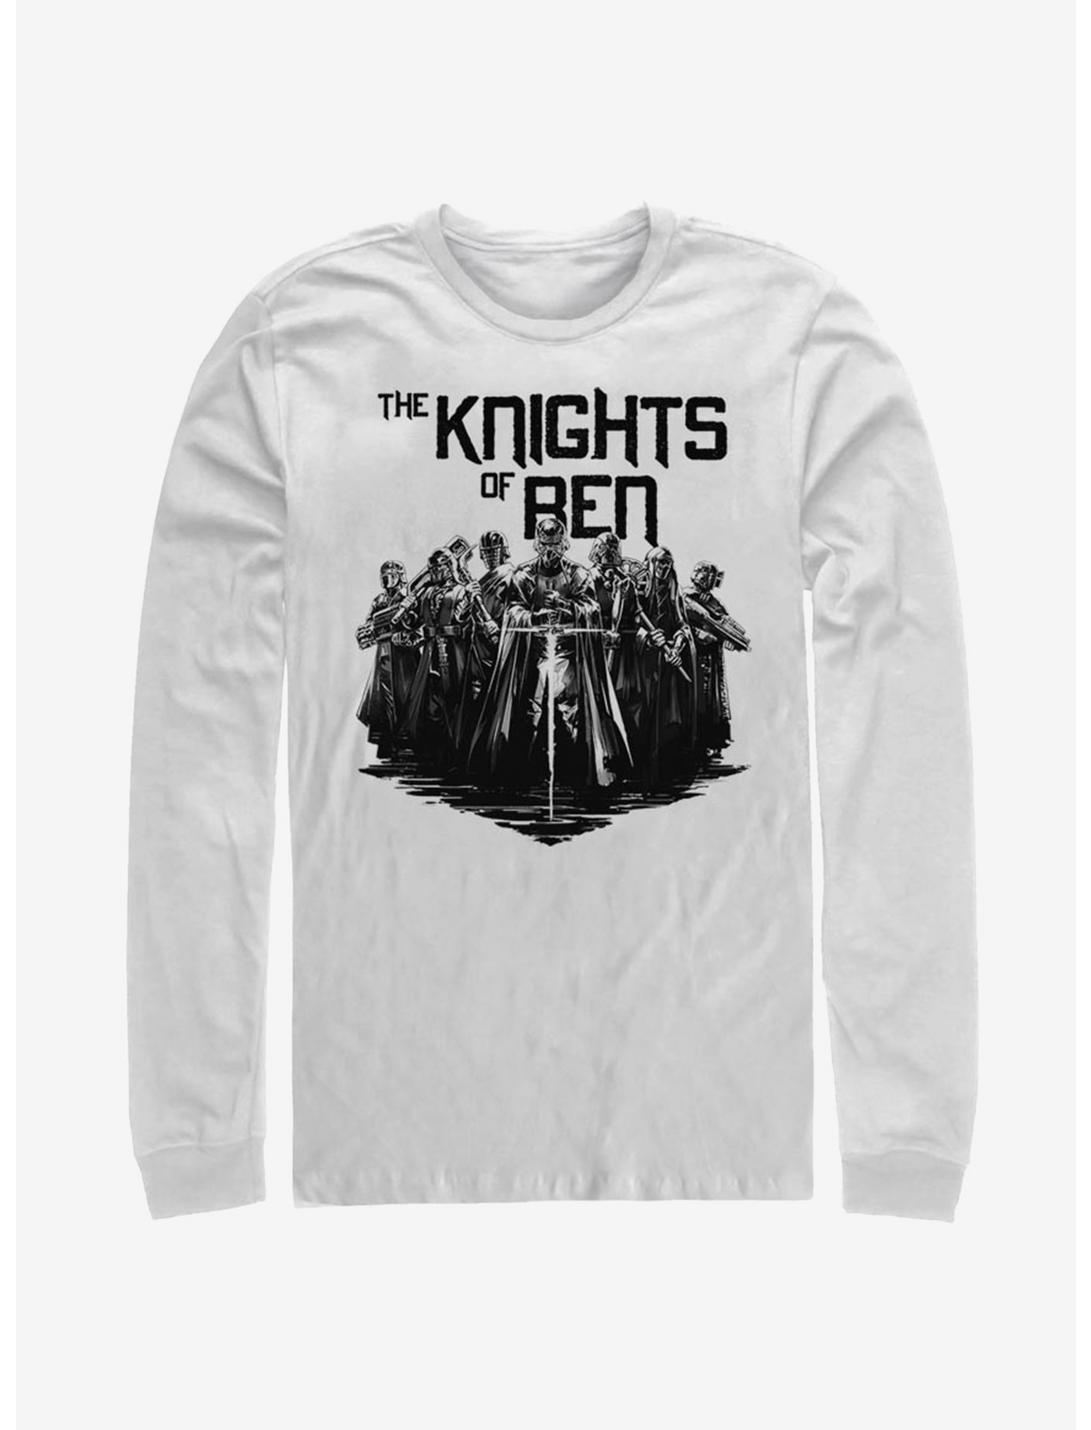 Star Wars Episode IX The Rise Of Skywalker Inked Knights Long-Sleeve T-Shirt, WHITE, hi-res